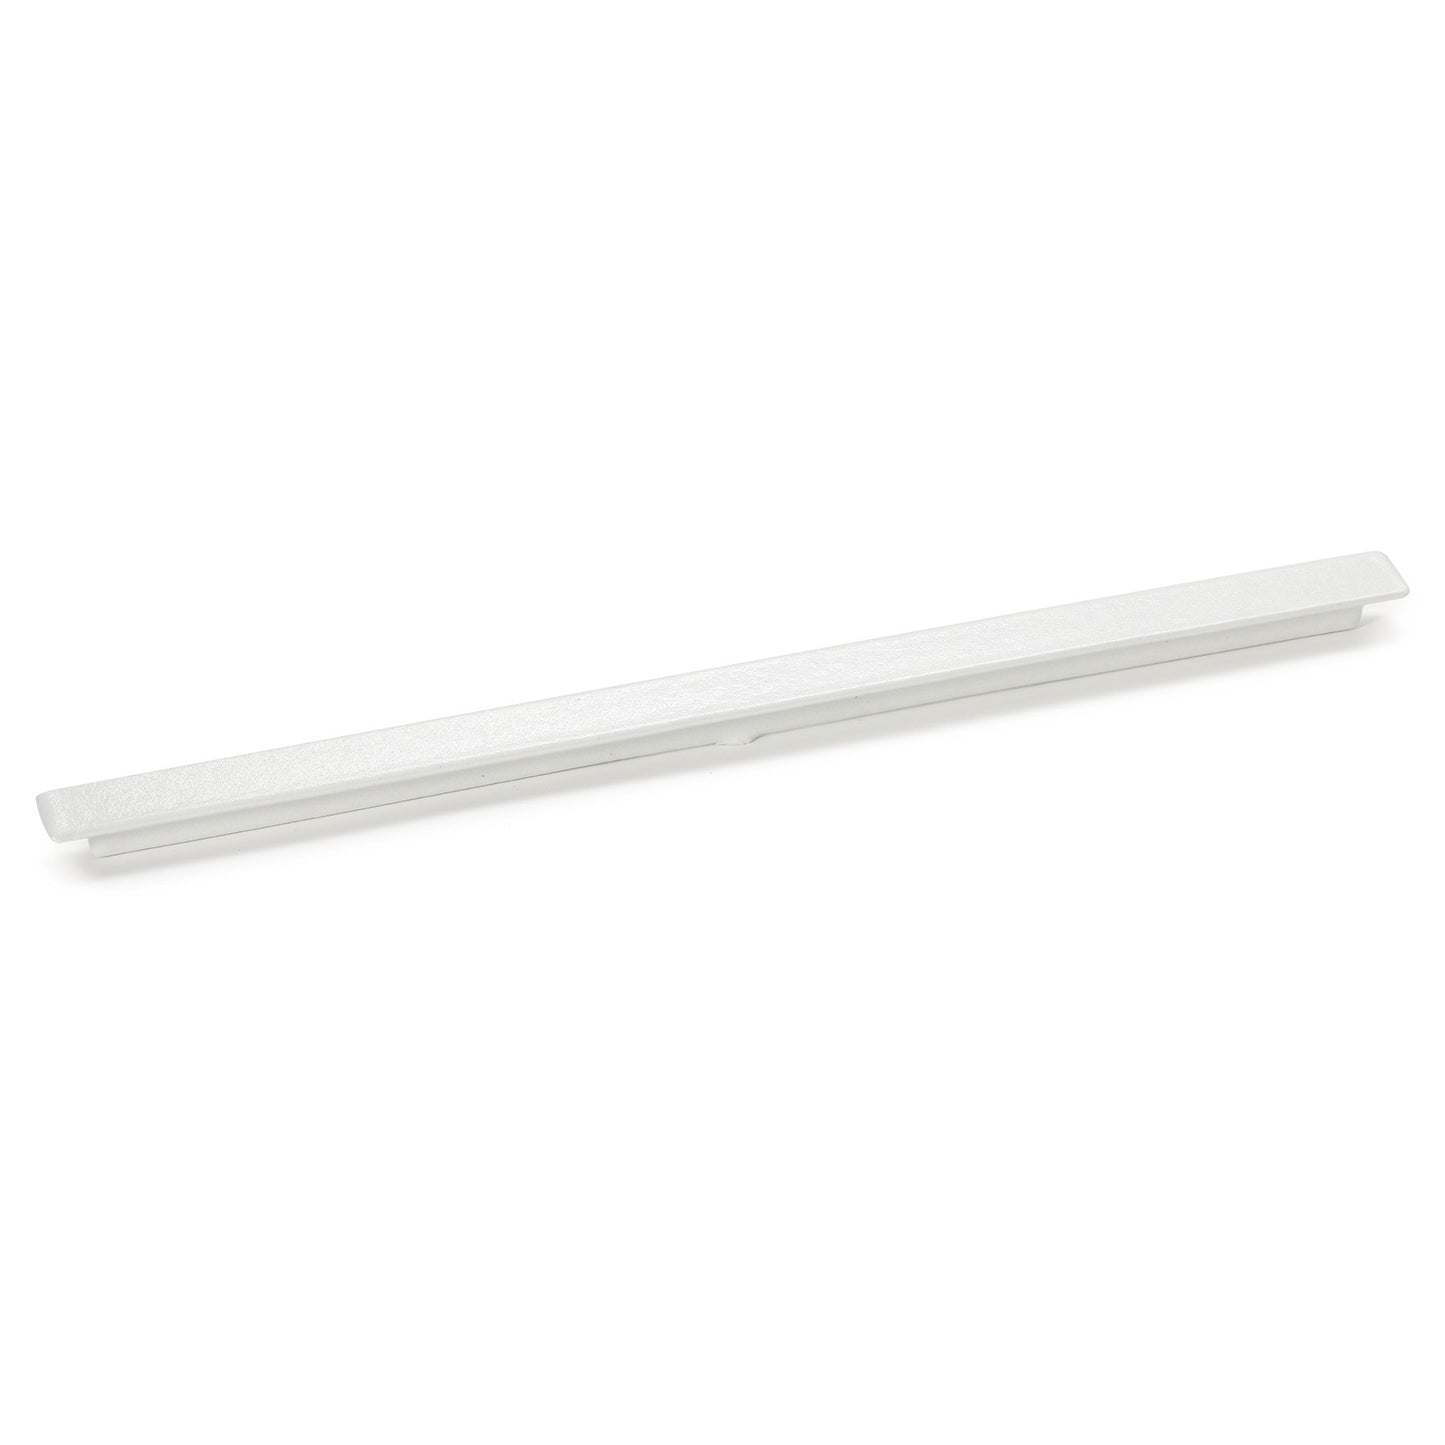 2" Wide Gap Bar for Fit Perfect Cold Bar System, Seals Gap to Prevent Cold Air from Escaping, 20.88" x 2", Glossy Smooth MOD Finish in White, Bugambilia Fit Perfect (stocked)